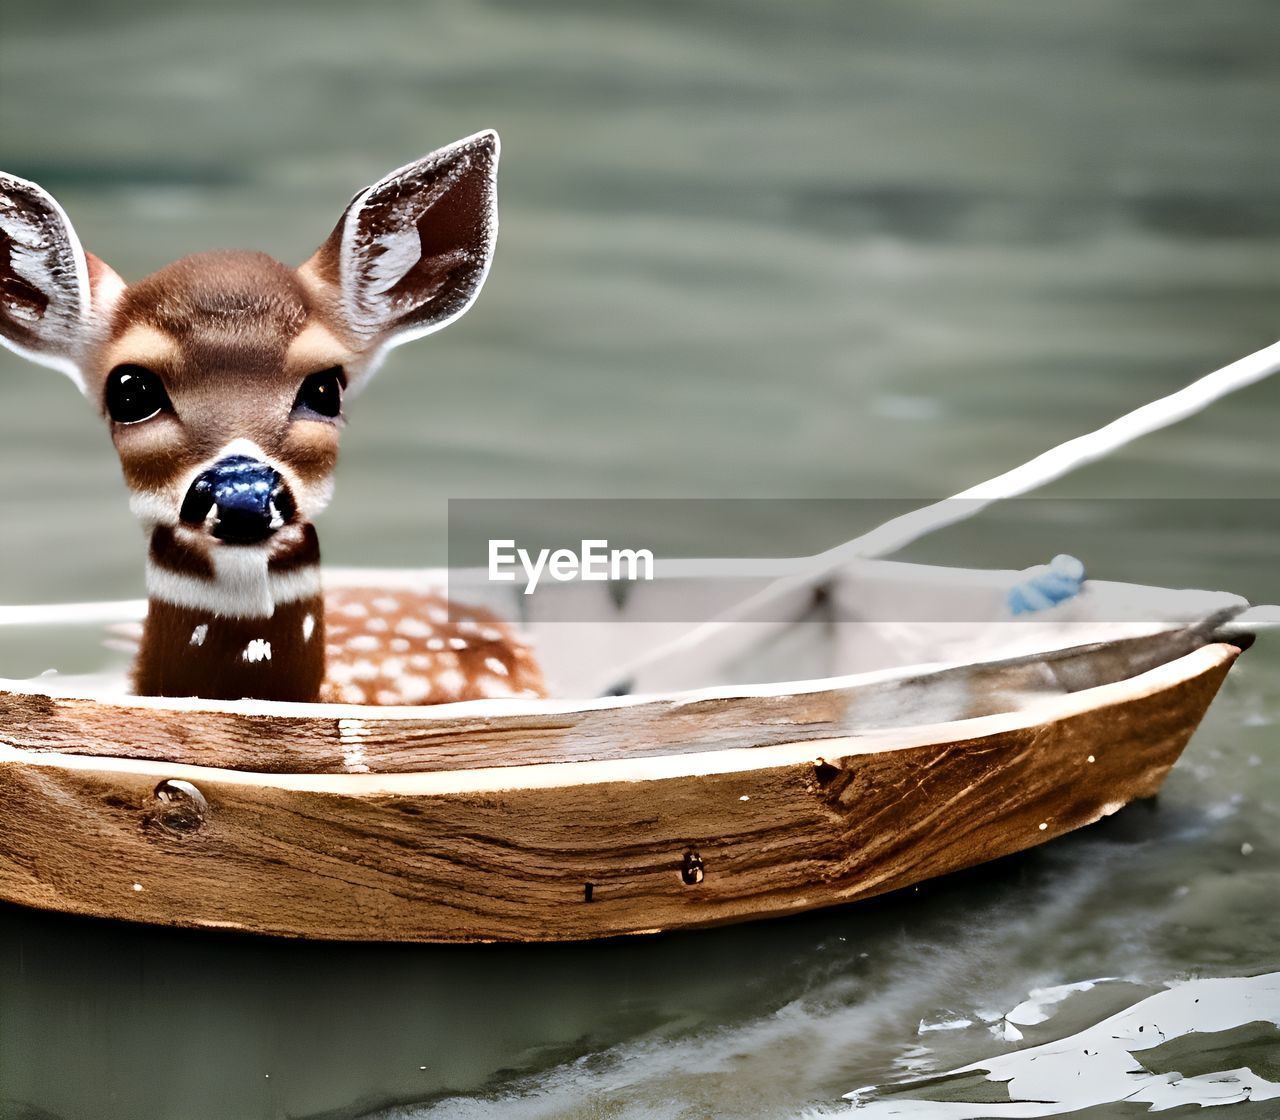 animal, animal themes, mammal, one animal, water, deer, no people, nautical vessel, nature, portrait, boat, animal wildlife, animal body part, transportation, day, looking at camera, outdoors, domestic animals, fun